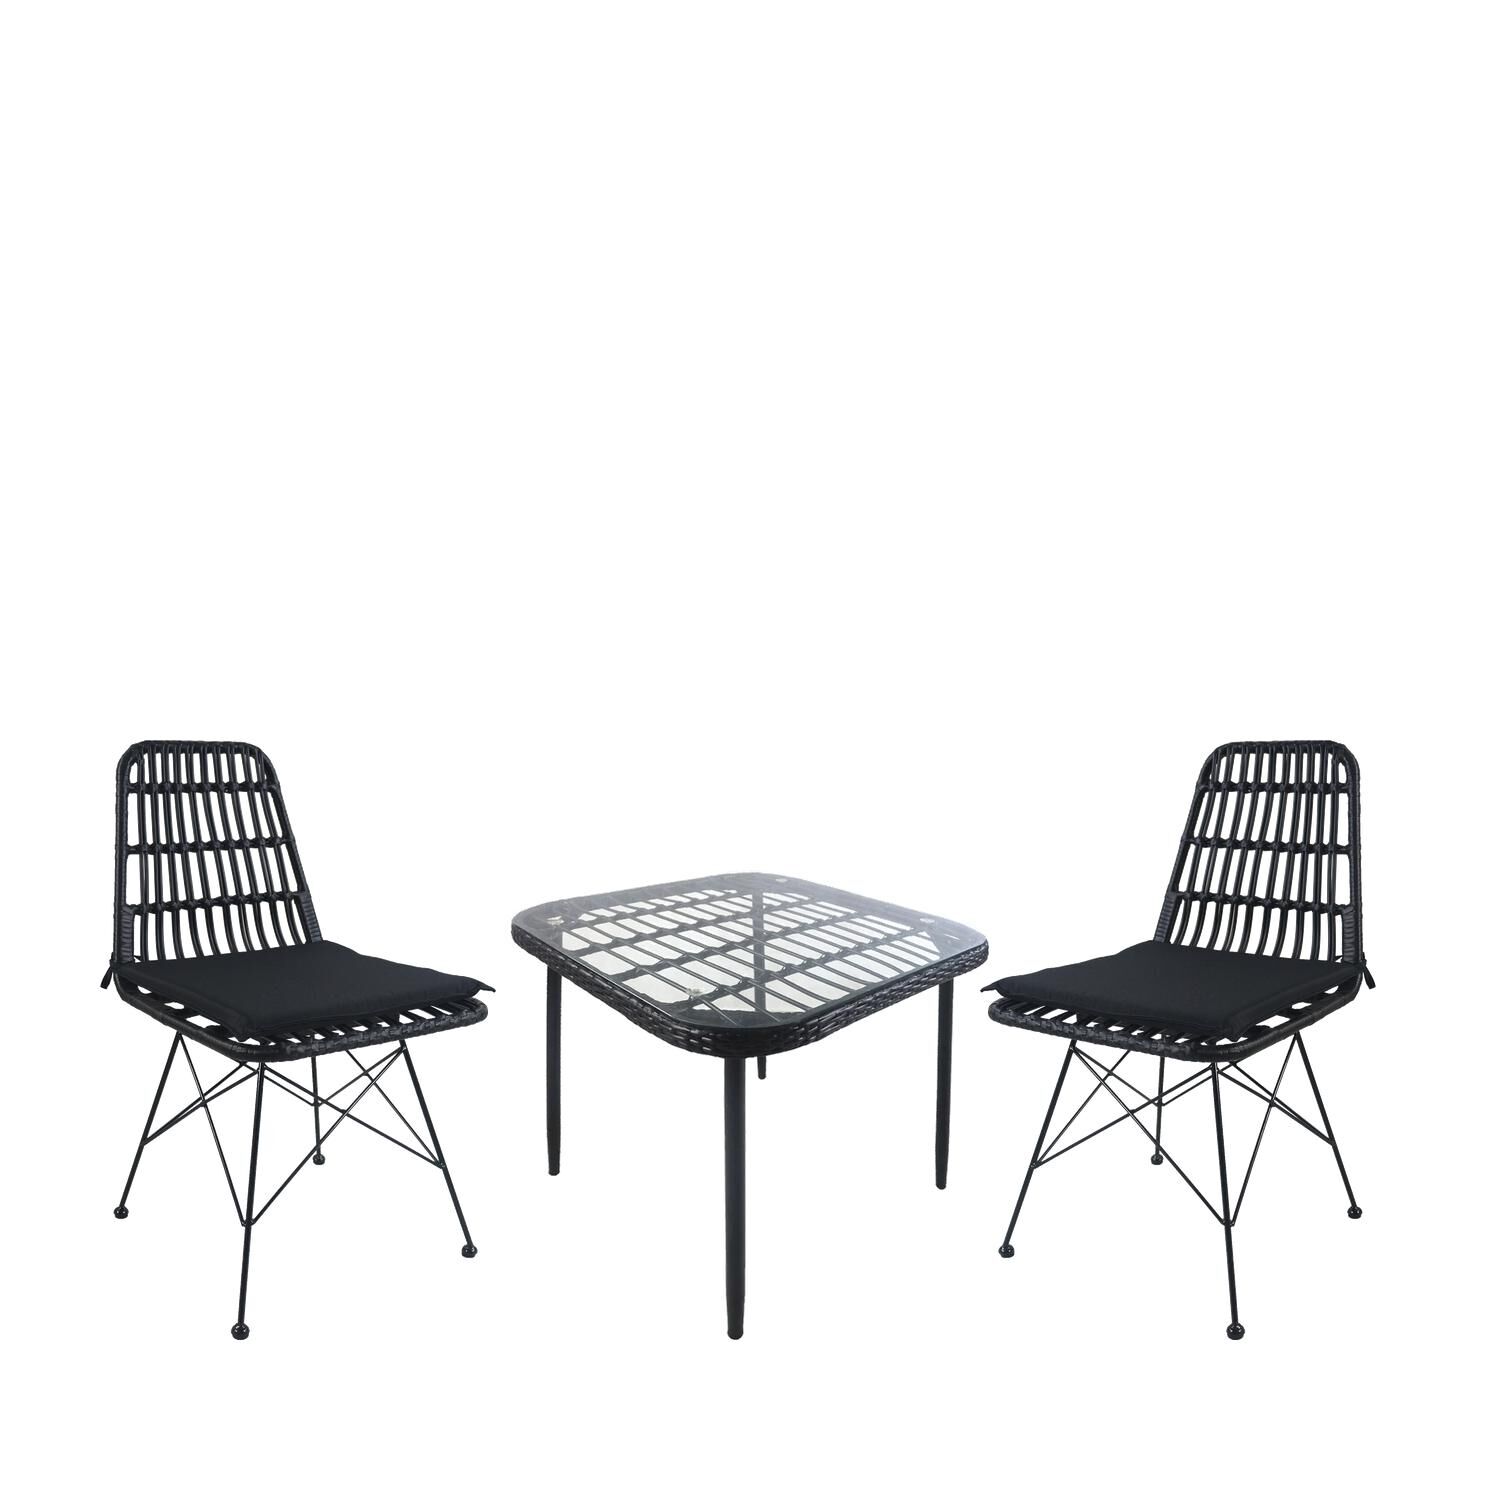 ANTIUS Garden Dining Set Black Metal/Rattan/Glass With 2 Chairs 14990363